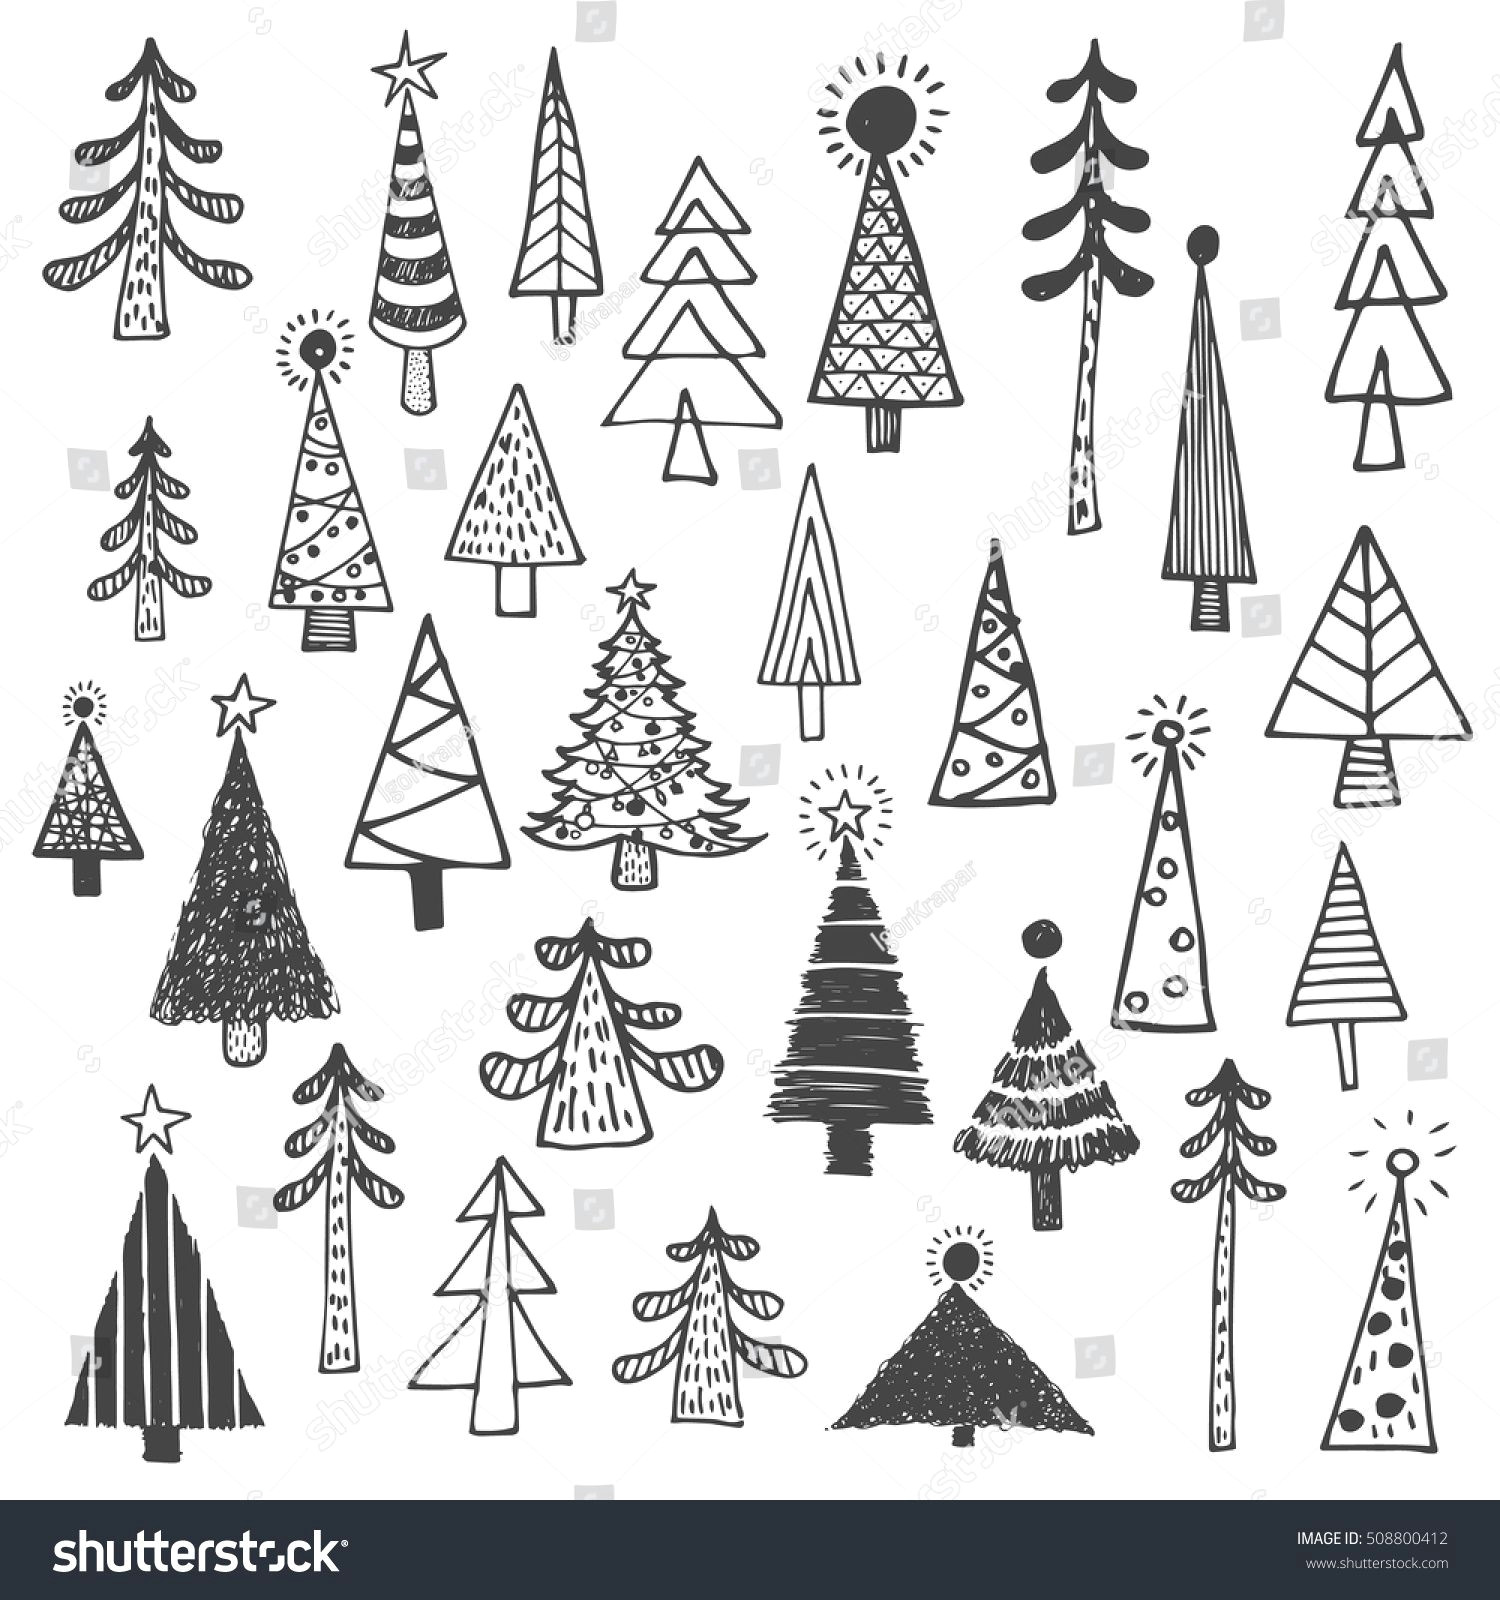 Trees that are Easy to Draw Christmas Tree White Spruce Fir Fir Tree Simple Drawing Set